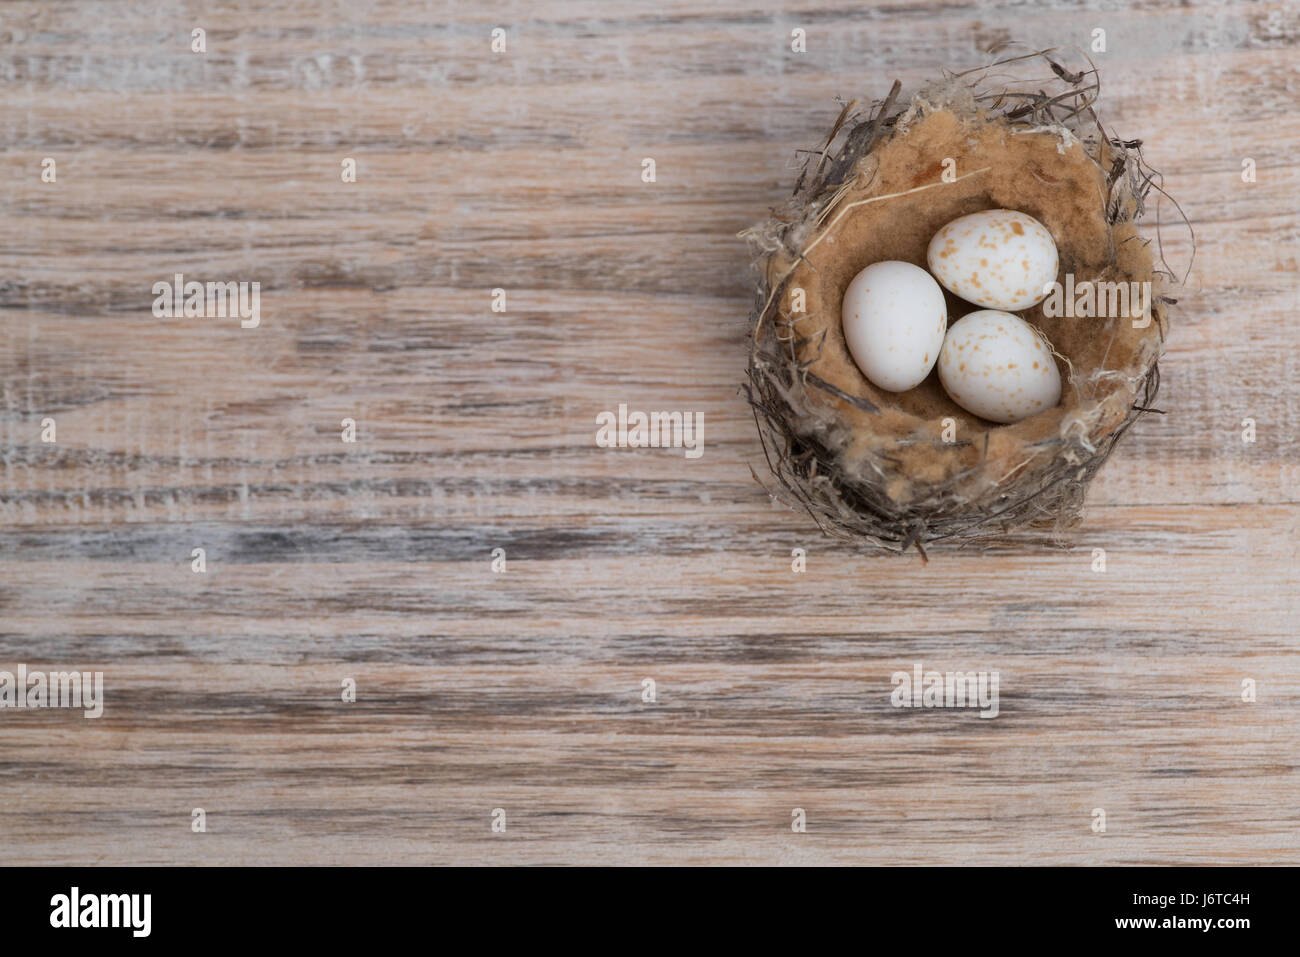 Small bird nest with speckled eggs on timber background Stock Photo